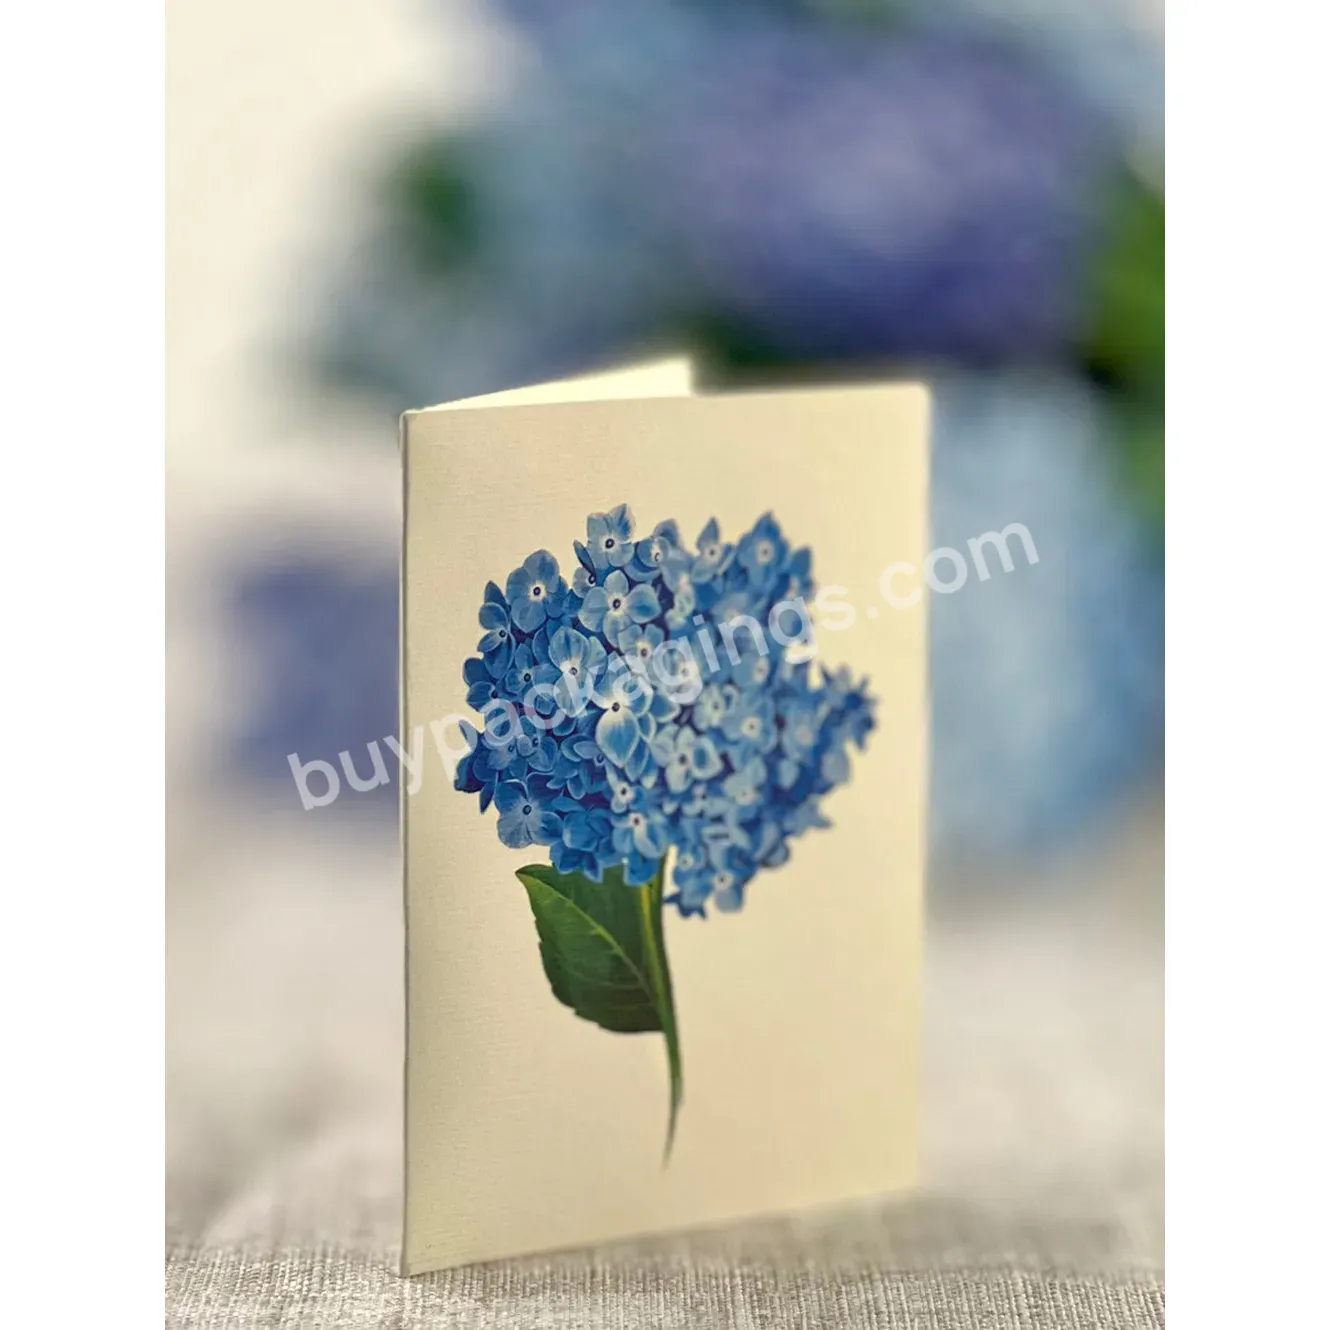 Zeecan 3d Pop Up Mothers Day Cards Flowers Floral Bouquet Greeting Card For Mom Wife Birthday Sympathy Get Well Anniversary - Buy 3d Pop Up Paper Card,Stars 3d Pop Up Card,Pop Up 3d Halloween Card.